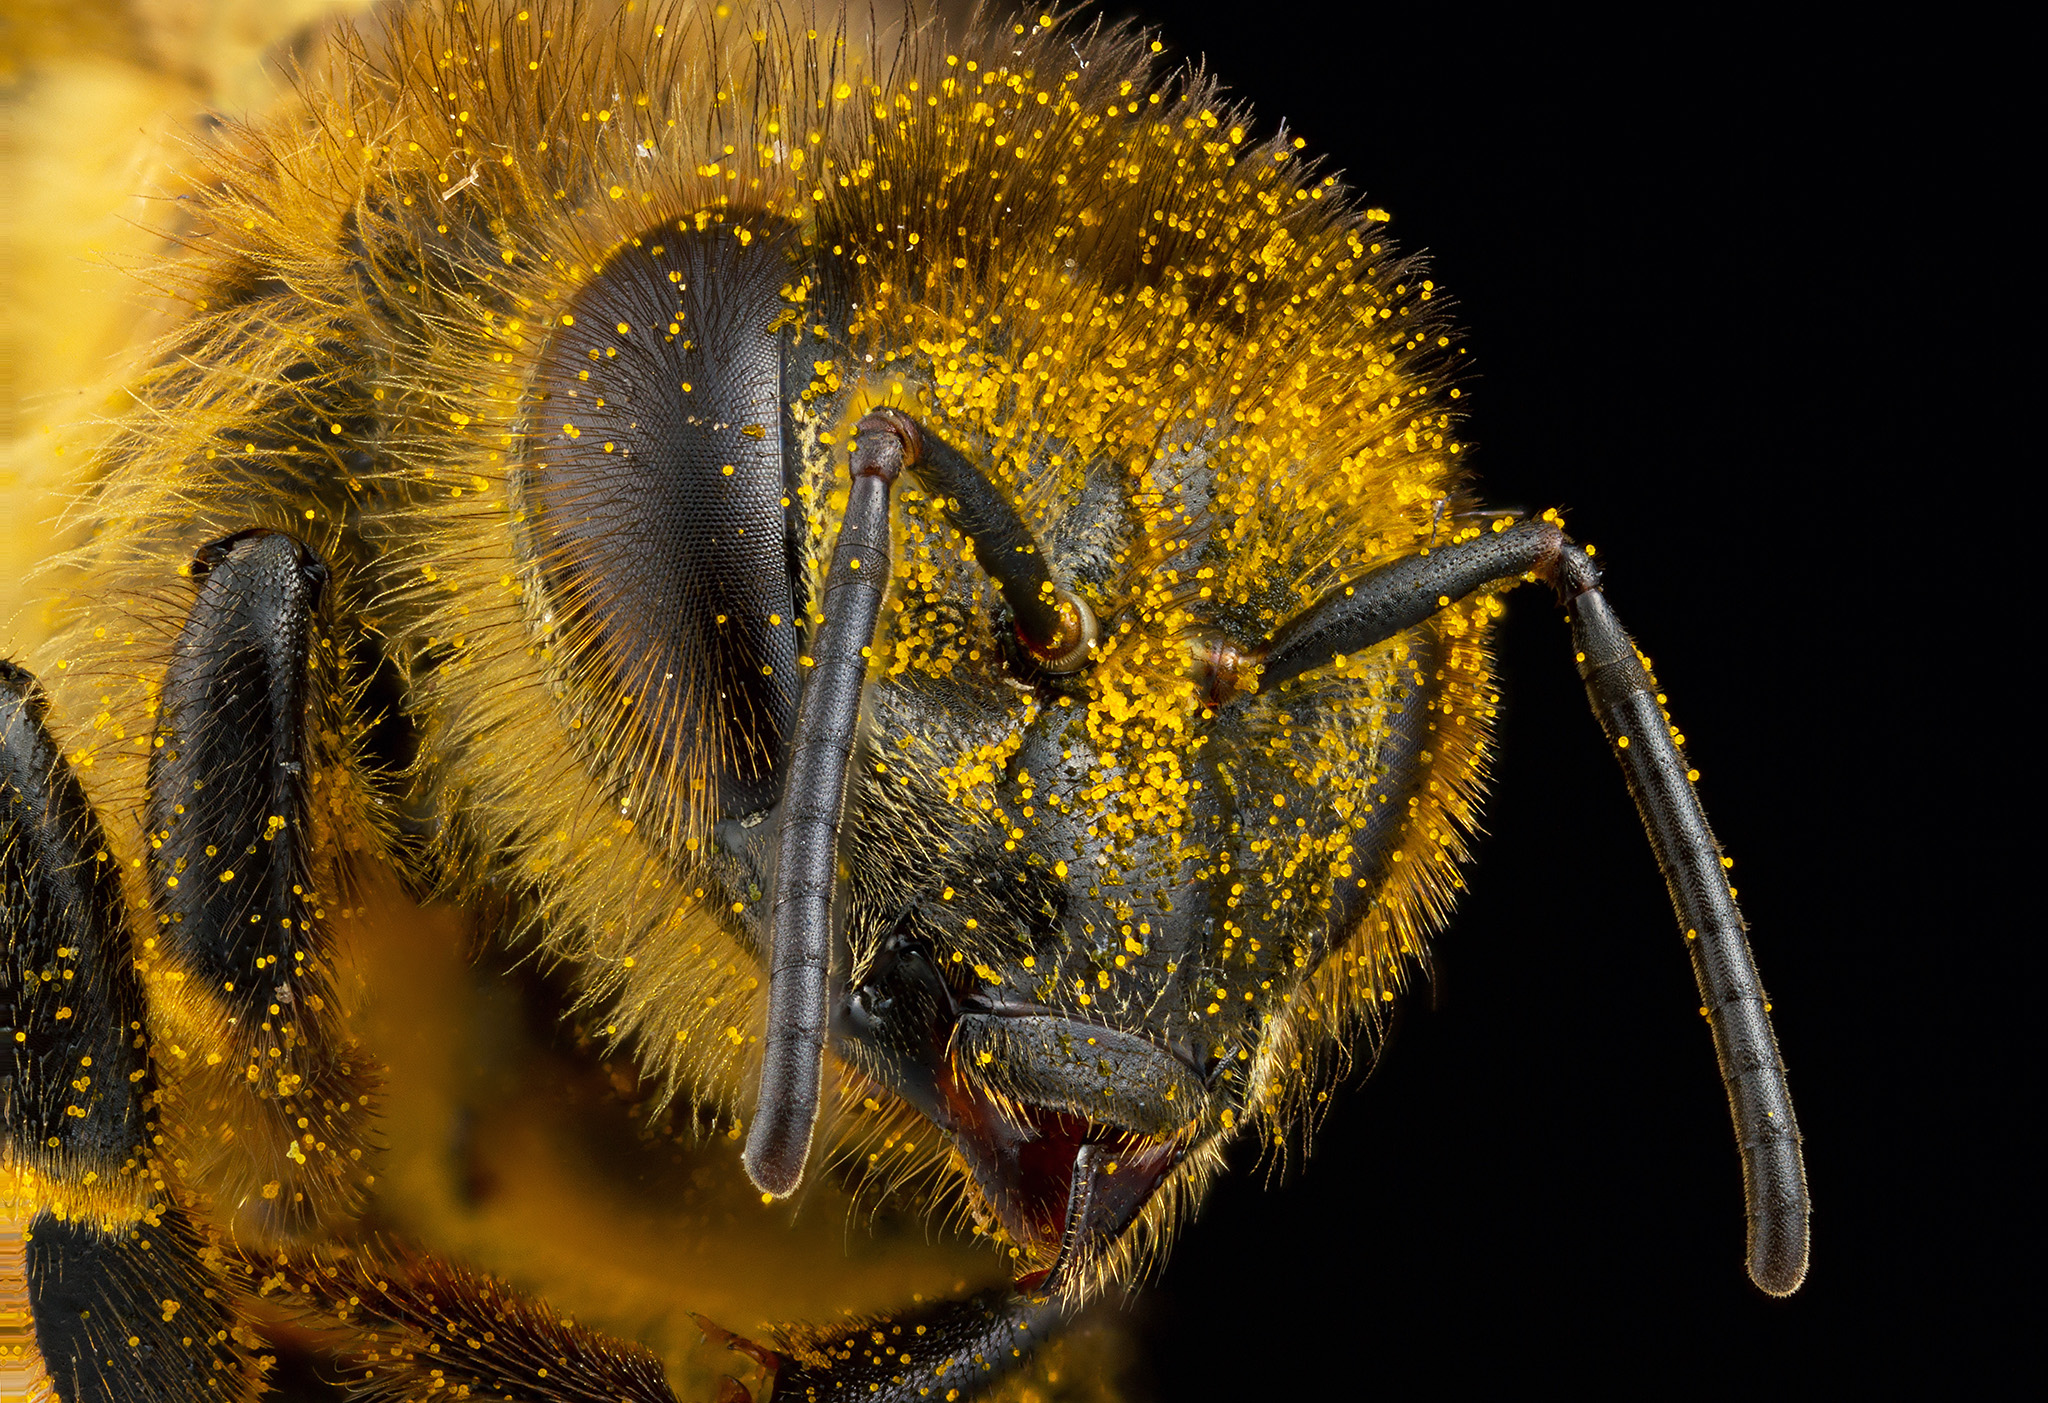 Super Close-Up Photos Of Insects Will Change The Way You Feel About ...